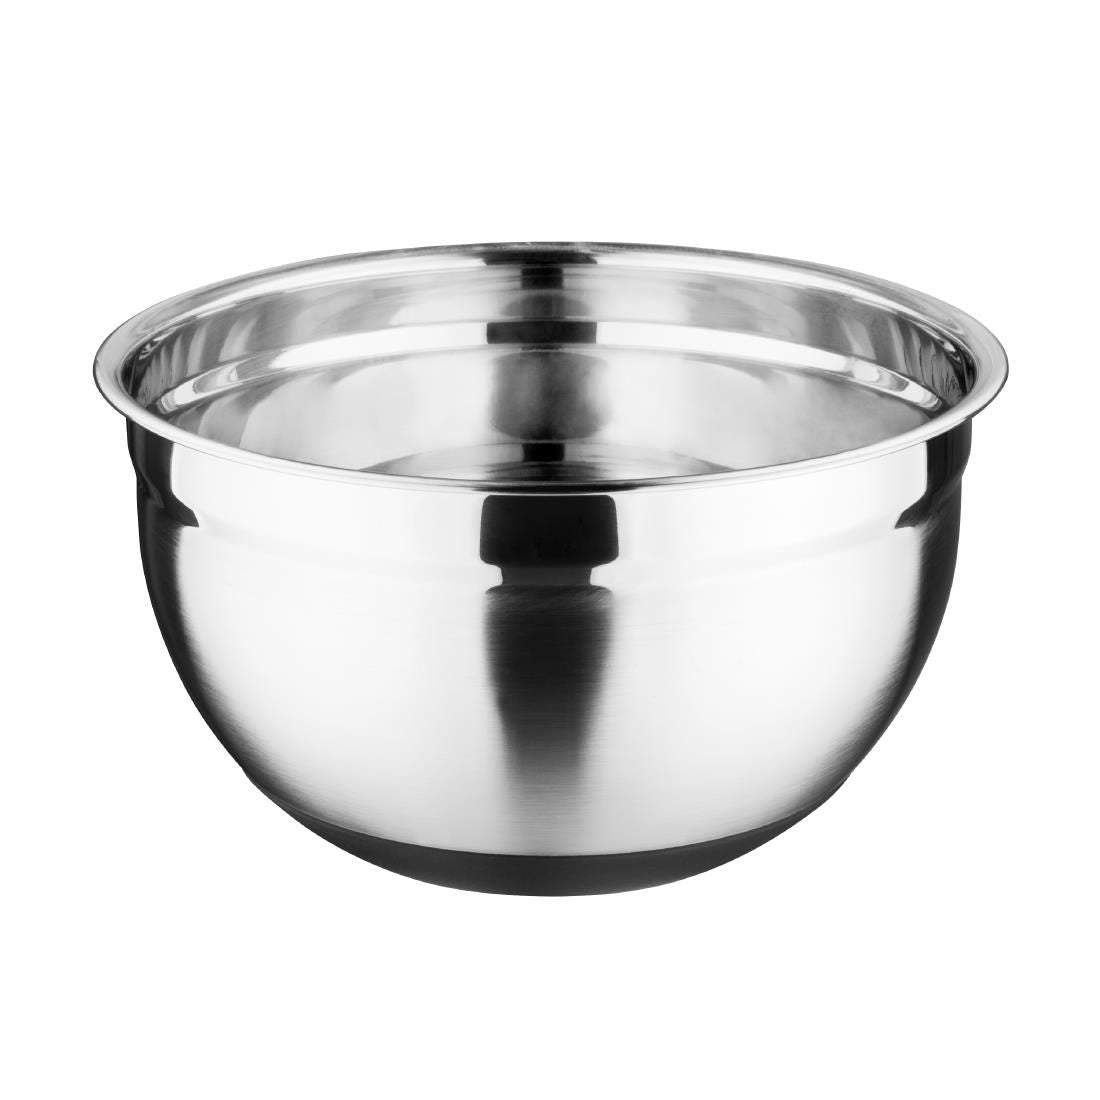 GG021 Vogue Stainless Steel Bowl with Silicone Base 3Ltr JD Catering Equipment Solutions Ltd